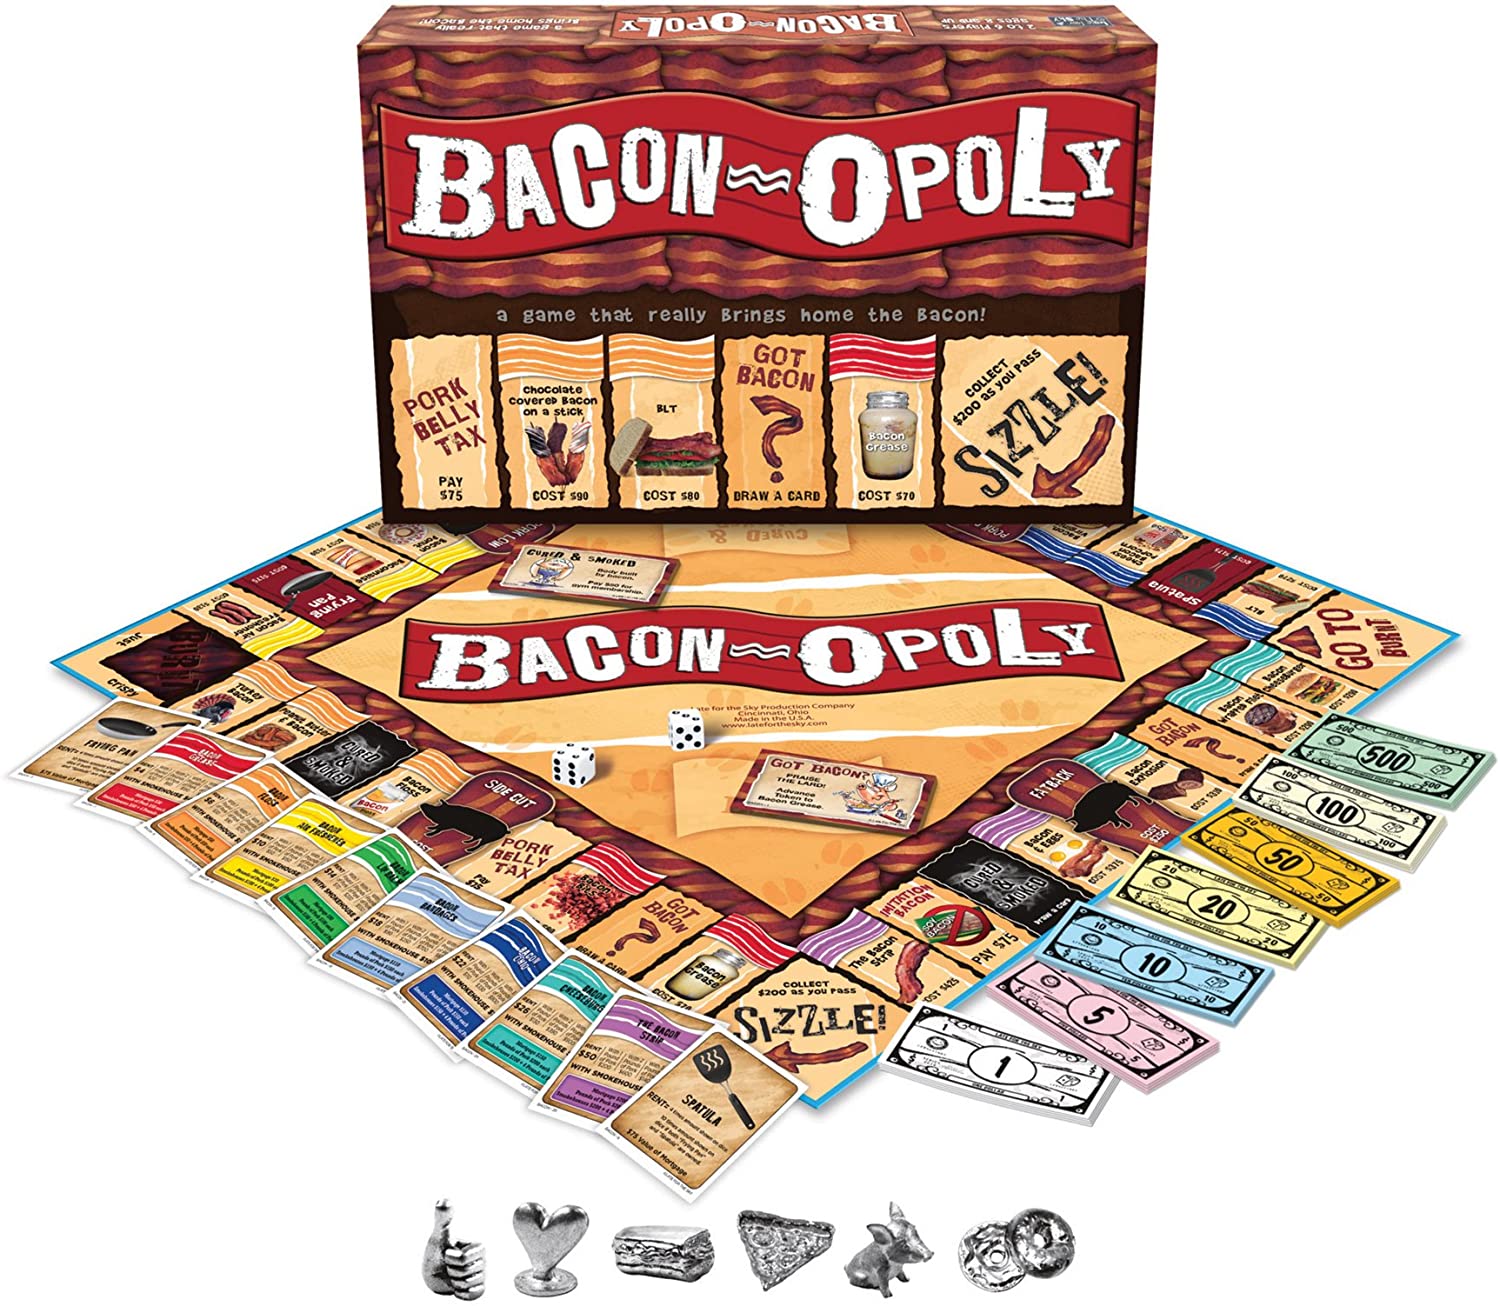 Bacon-Opoly Game